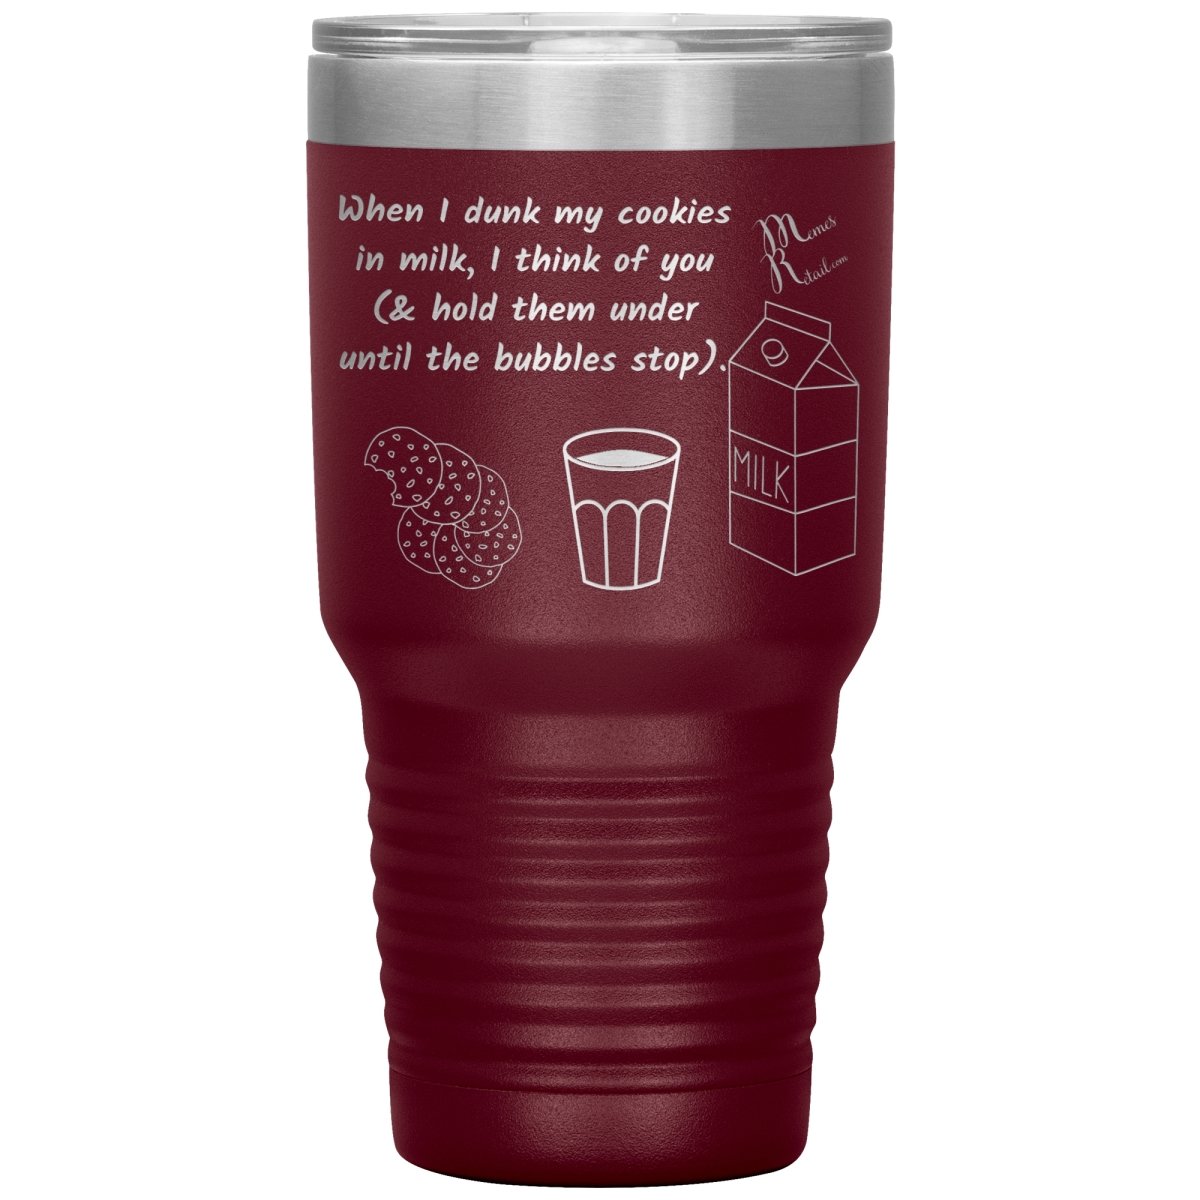 When I dunk My Cookies in Milk, I think of You - Tumblers, 30oz Insulated Tumbler / Maroon - MemesRetail.com